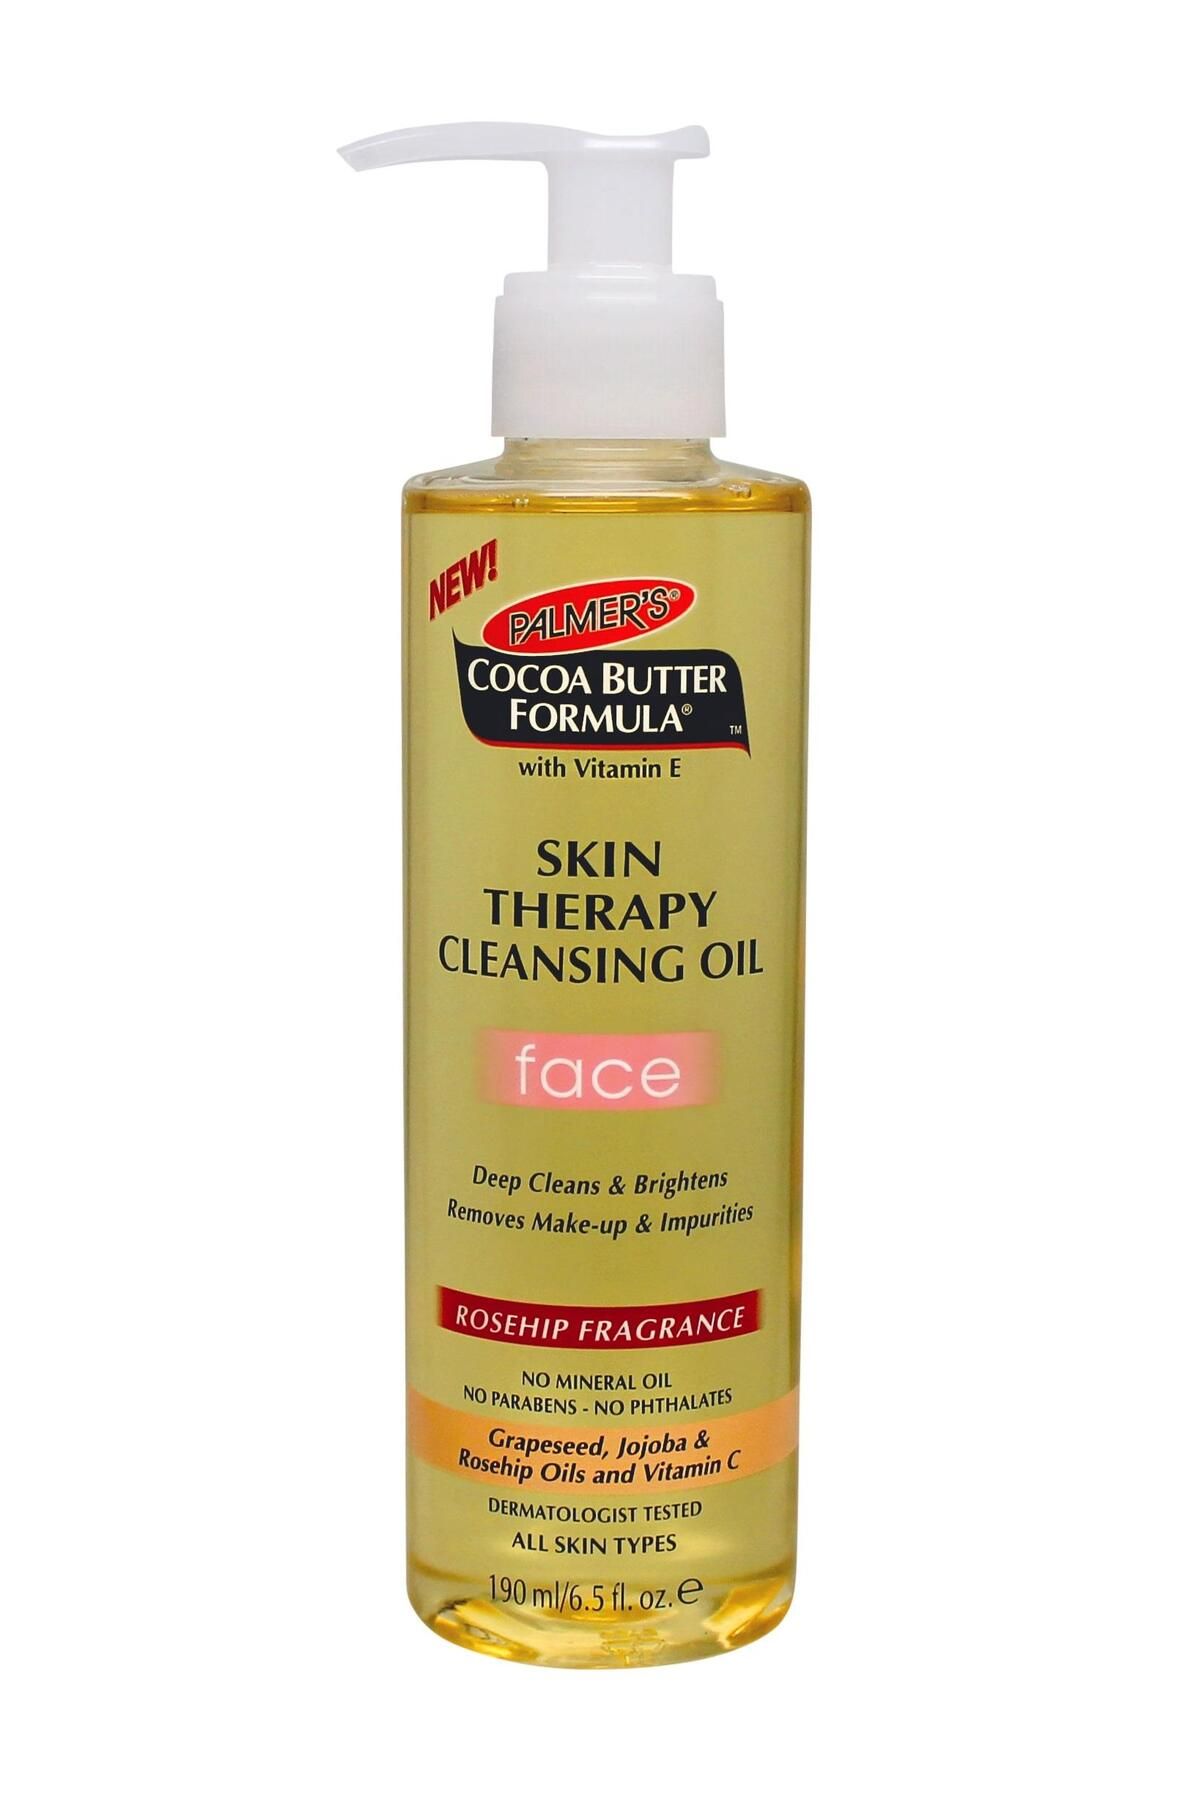 PALMER'S Cocoa Butter Skin Therapy Cleansing 190ml,cilt Bakım Yağ